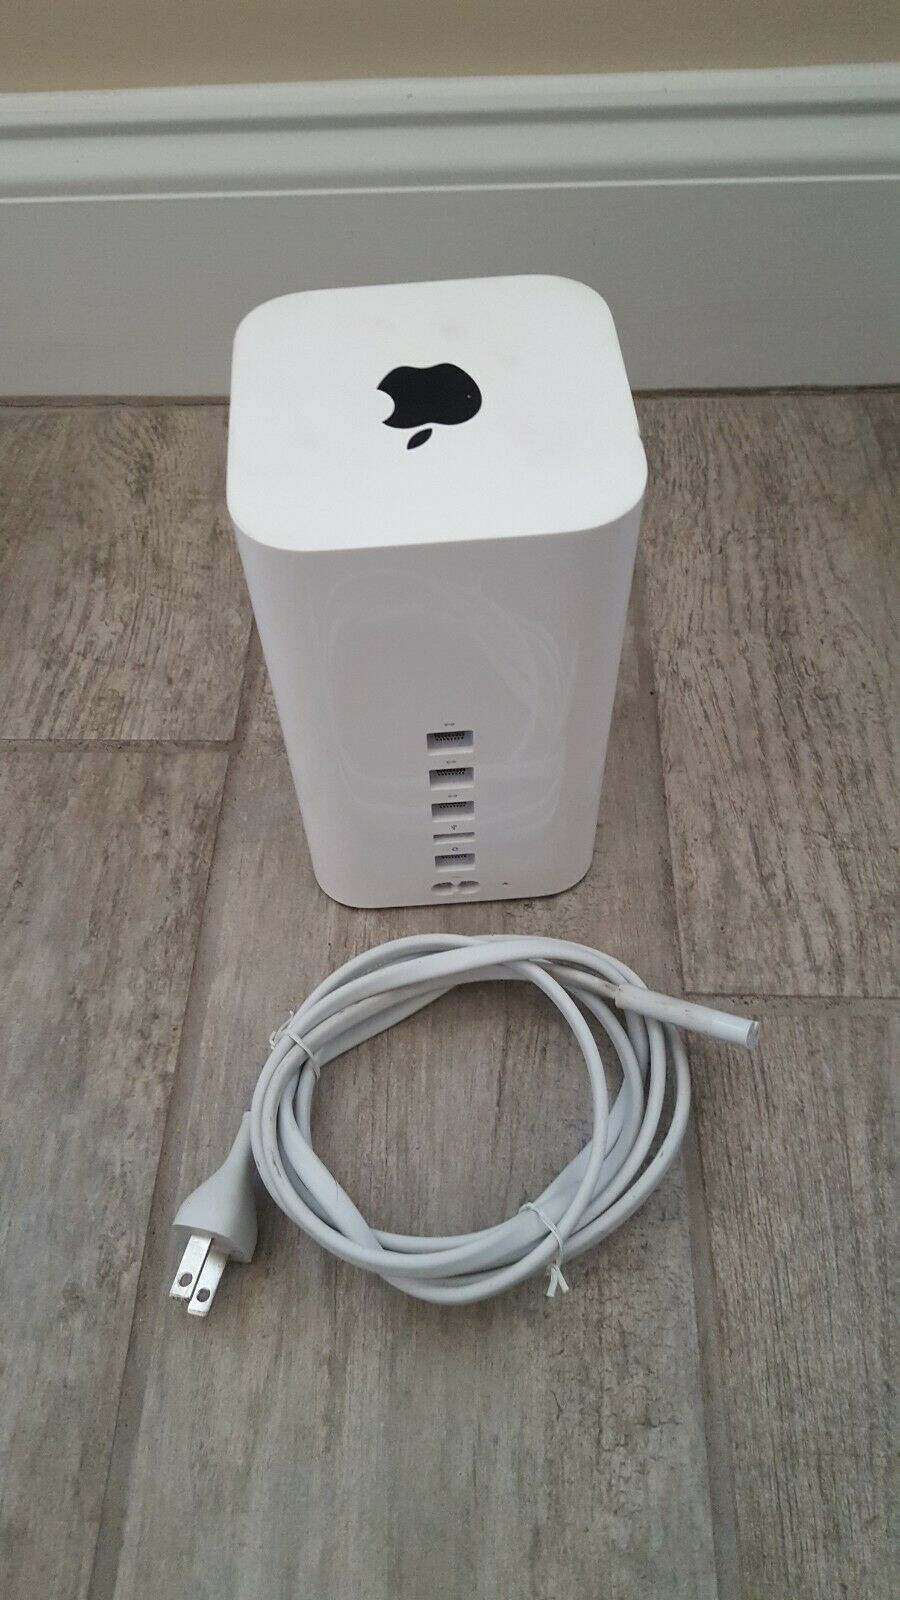 apple airport base station updates